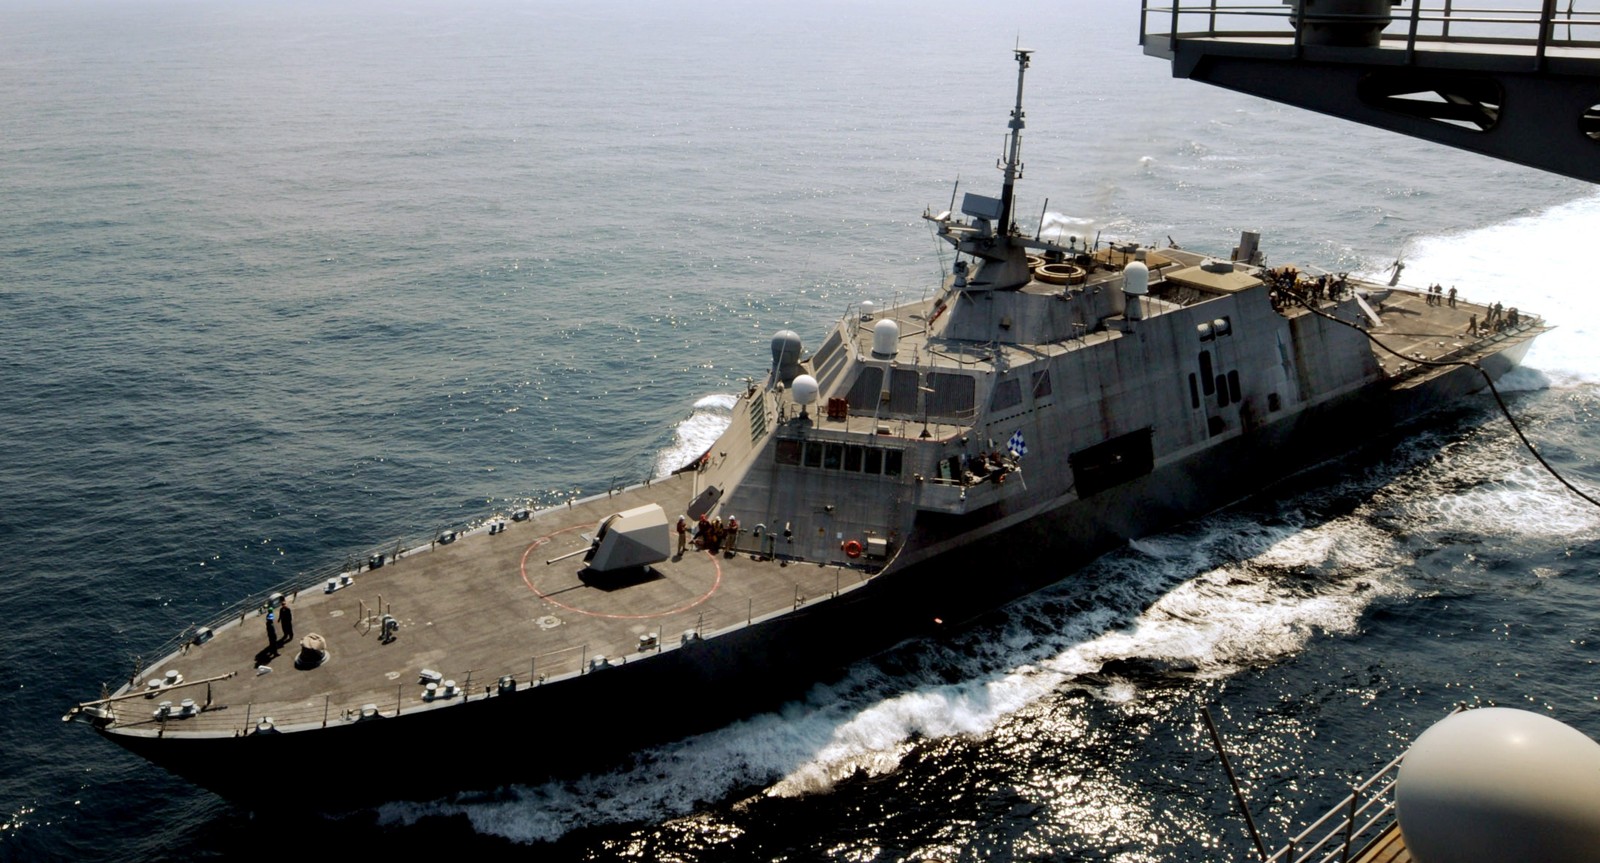 lcs-1 uss freedom class littoral combat ship us navy 86